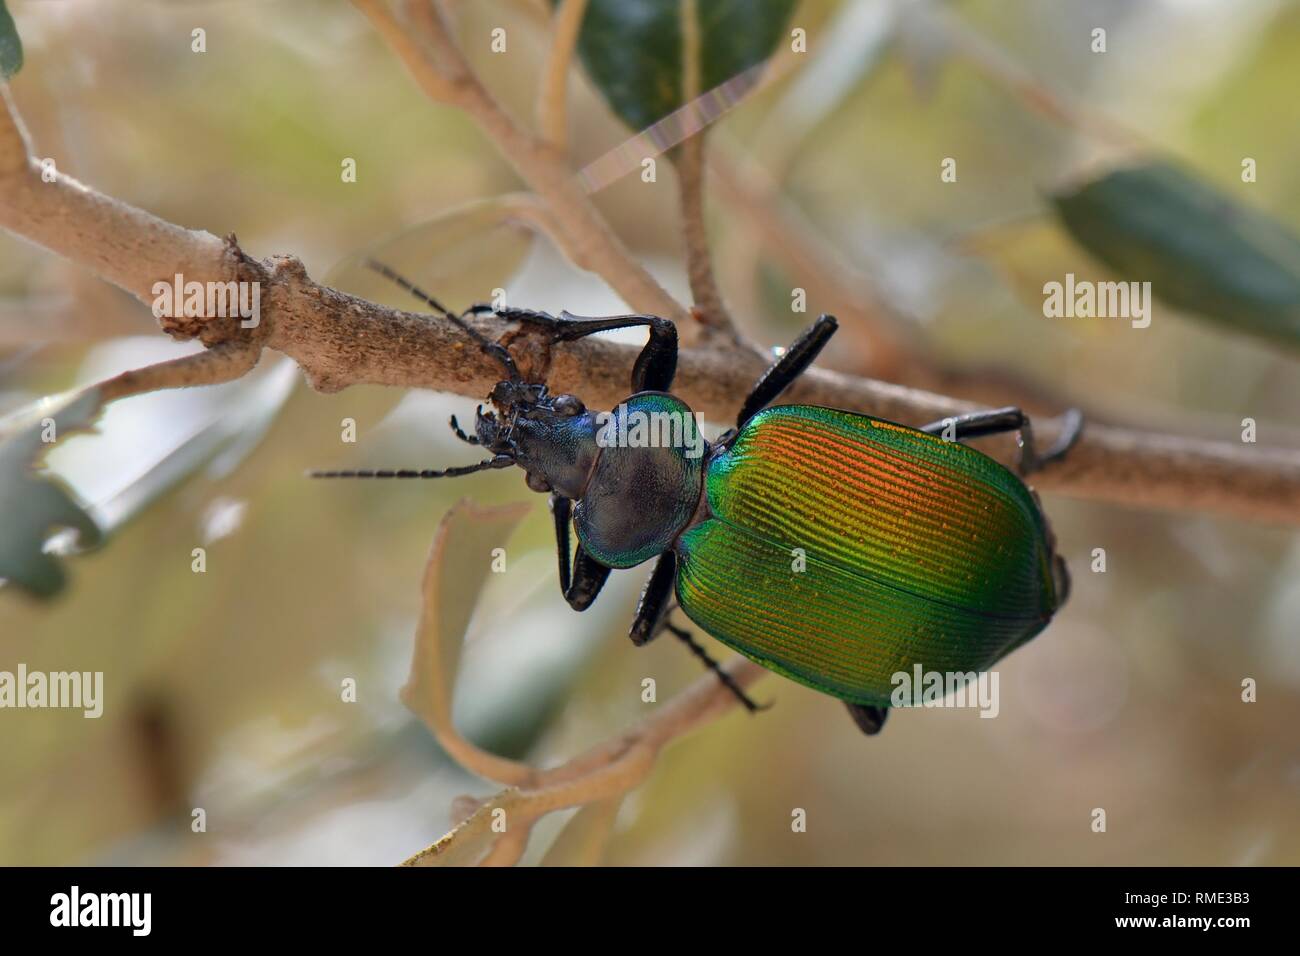 Forest caterpillar hunter (Calosoma sycophanta), a ground beetle foraging up in a Holm oak (Quercus ilex) tree in search of Gypsy moth caterpillar (Ly Stock Photo